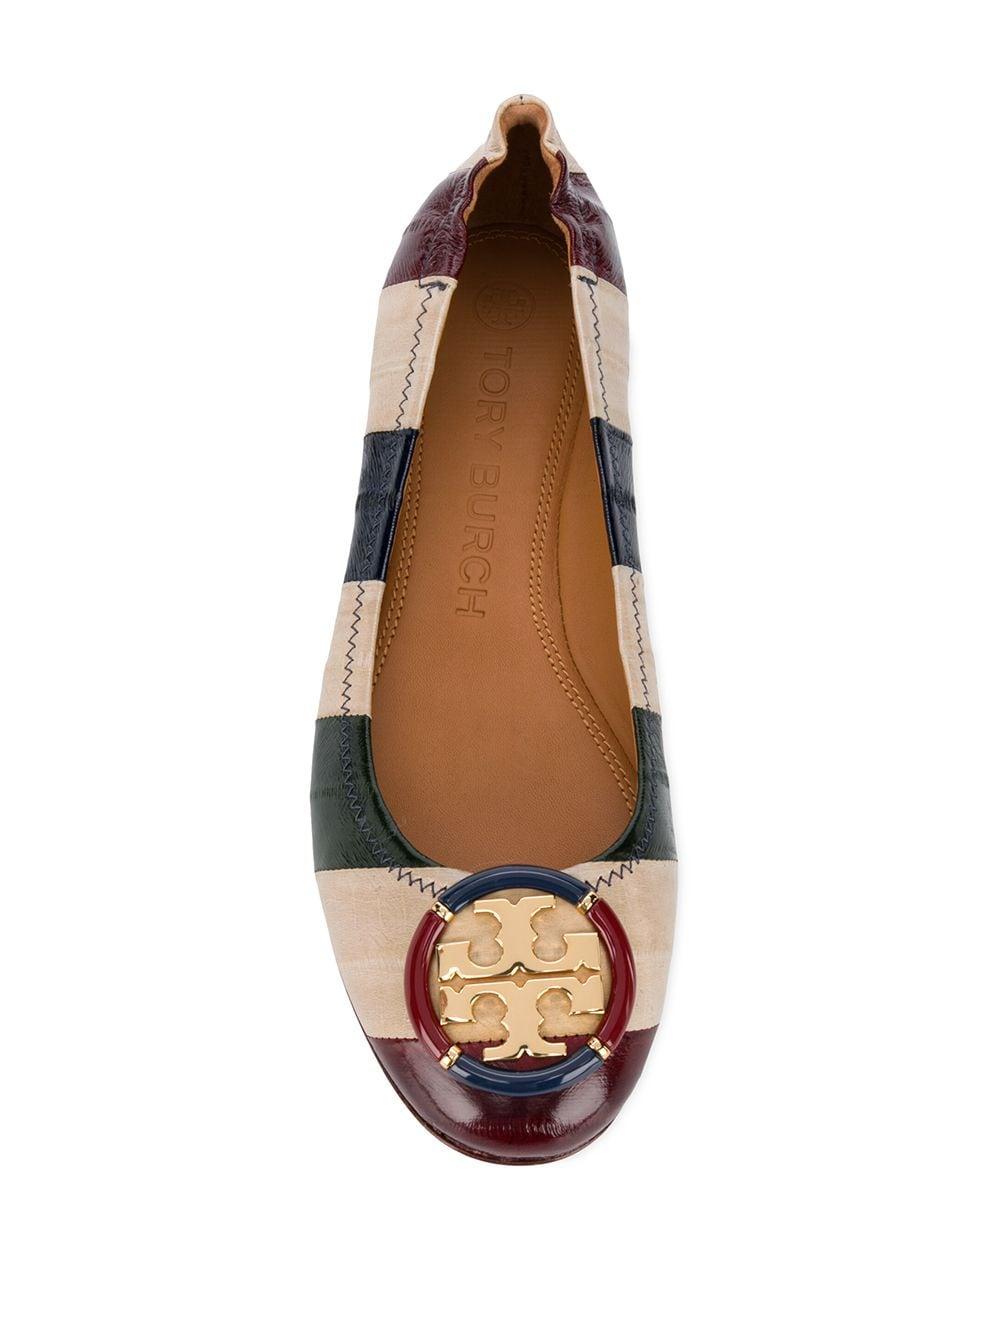 Tory Burch Striped Leather Ballerina Shoes - Lyst